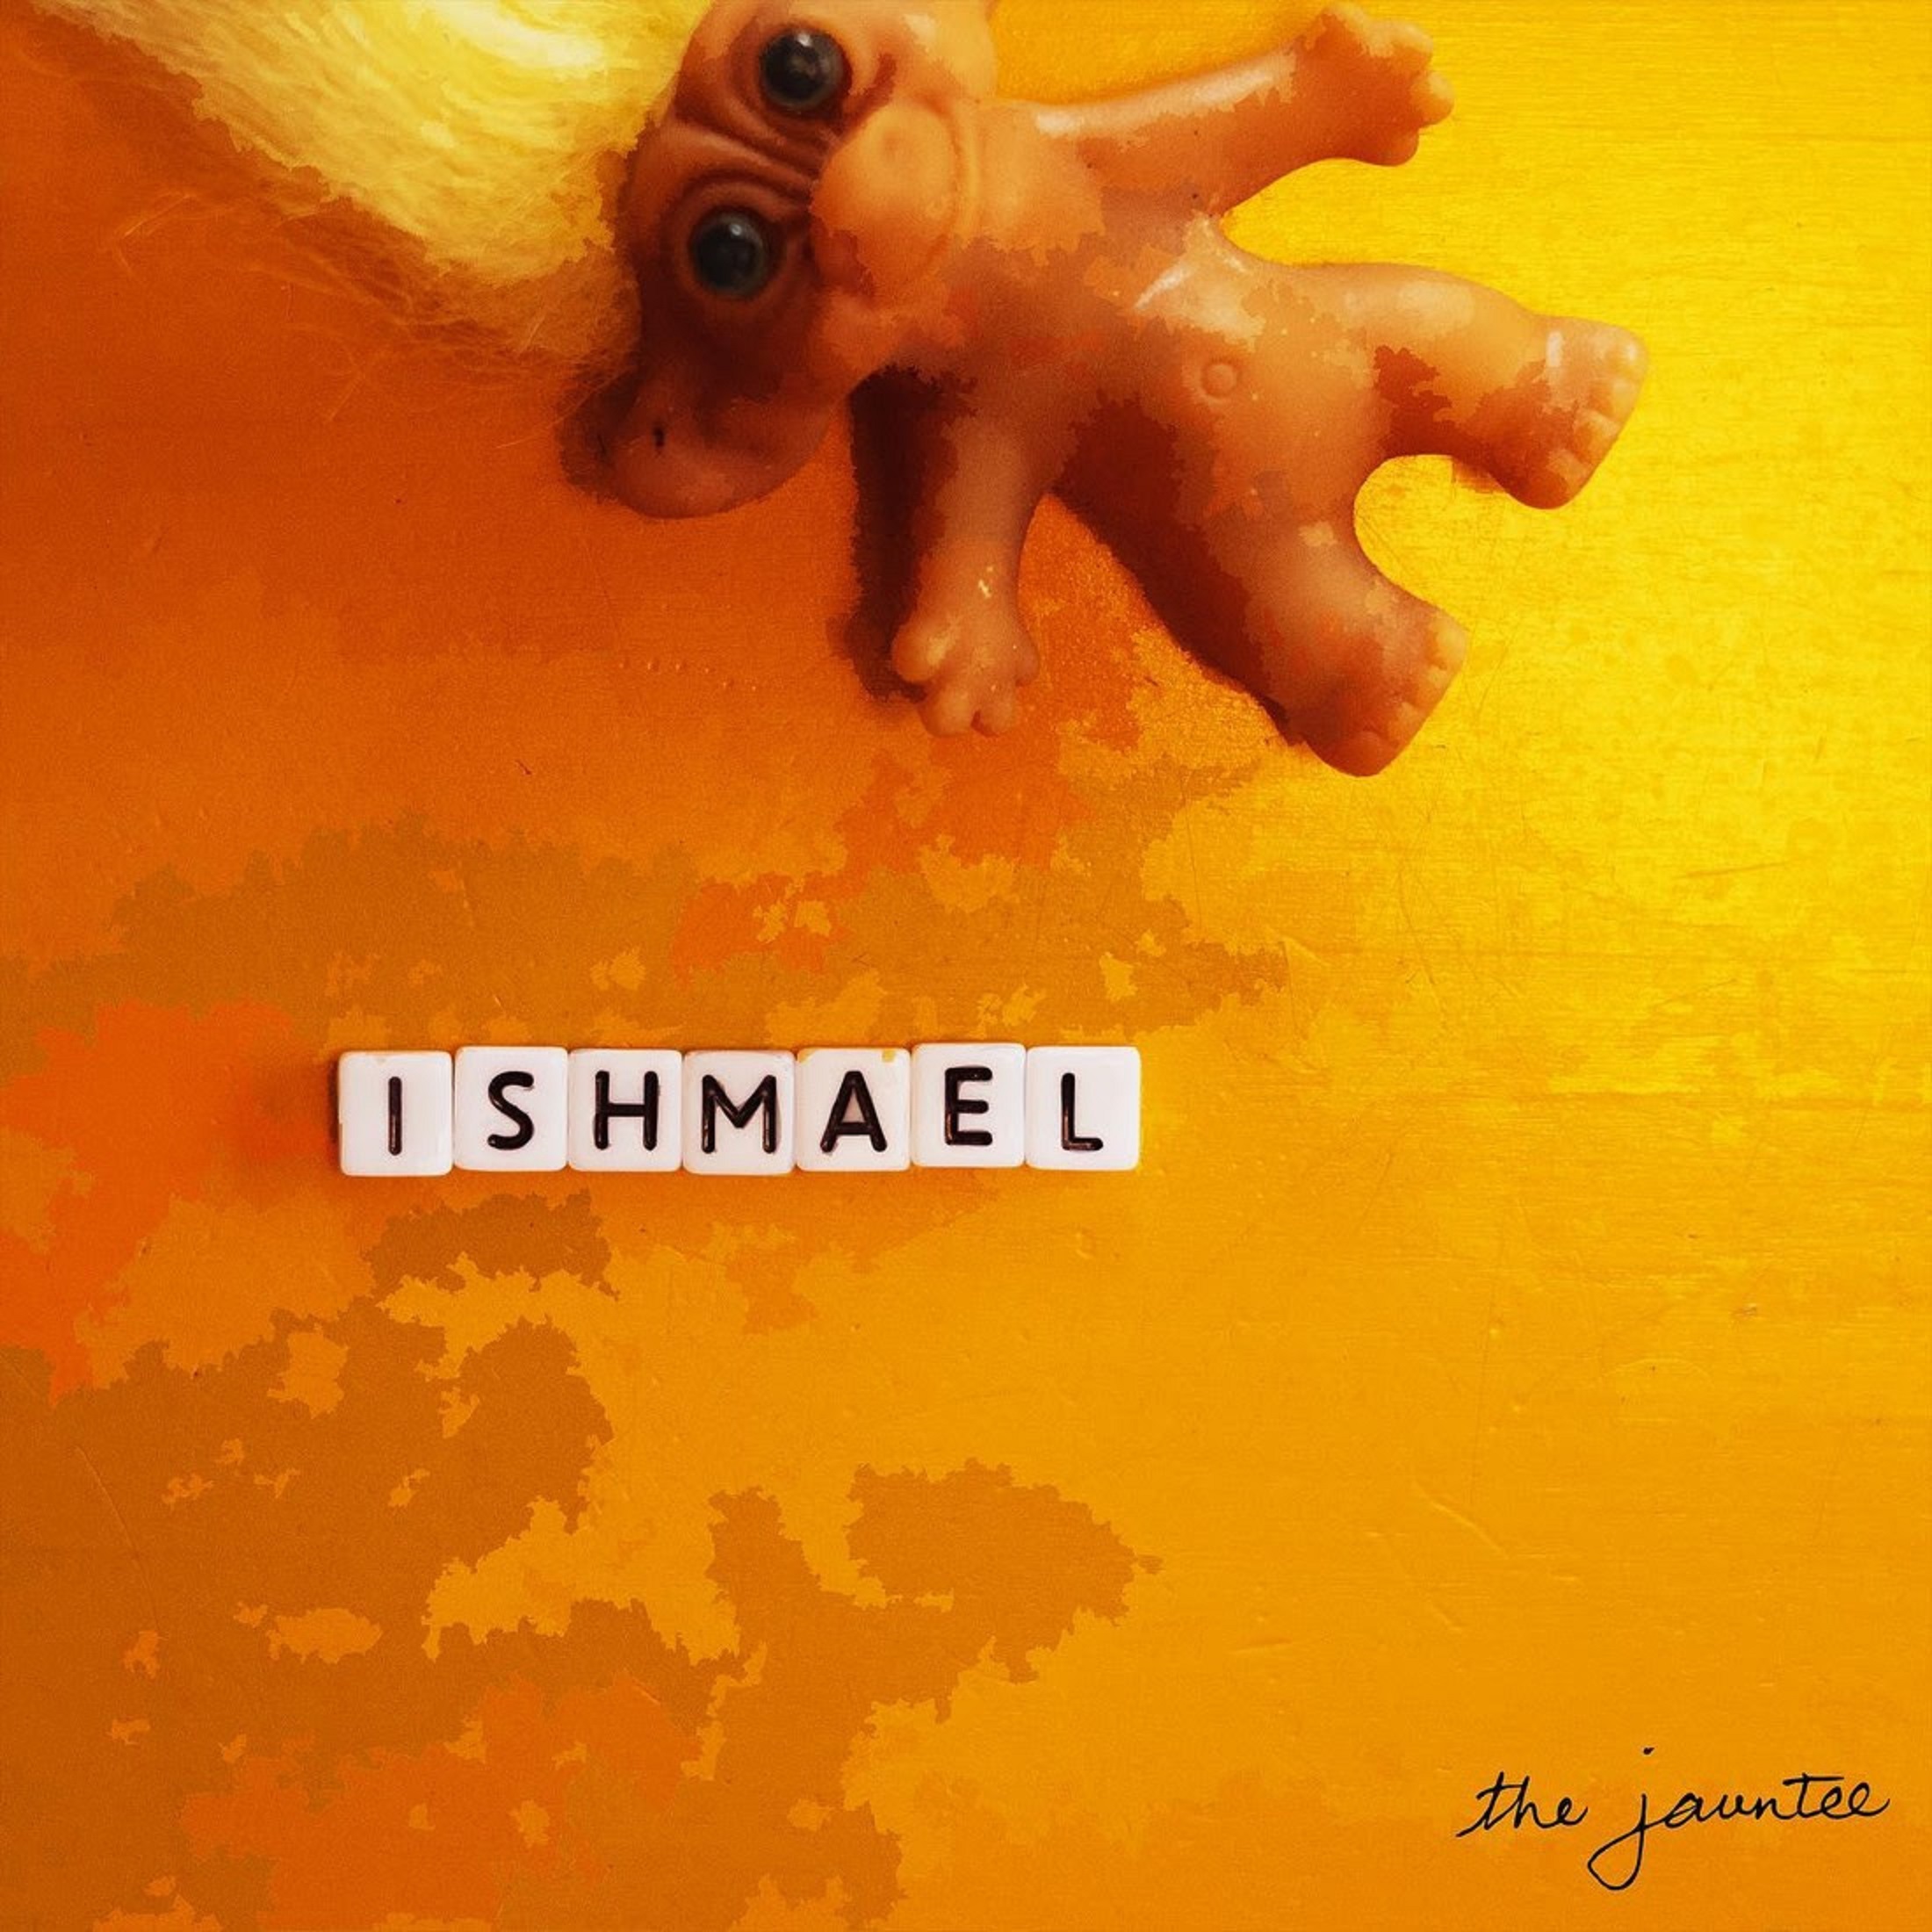 The Jauntee Speak to Humanity's Fragility & Relationship to Nature in New Single "Ishmael"